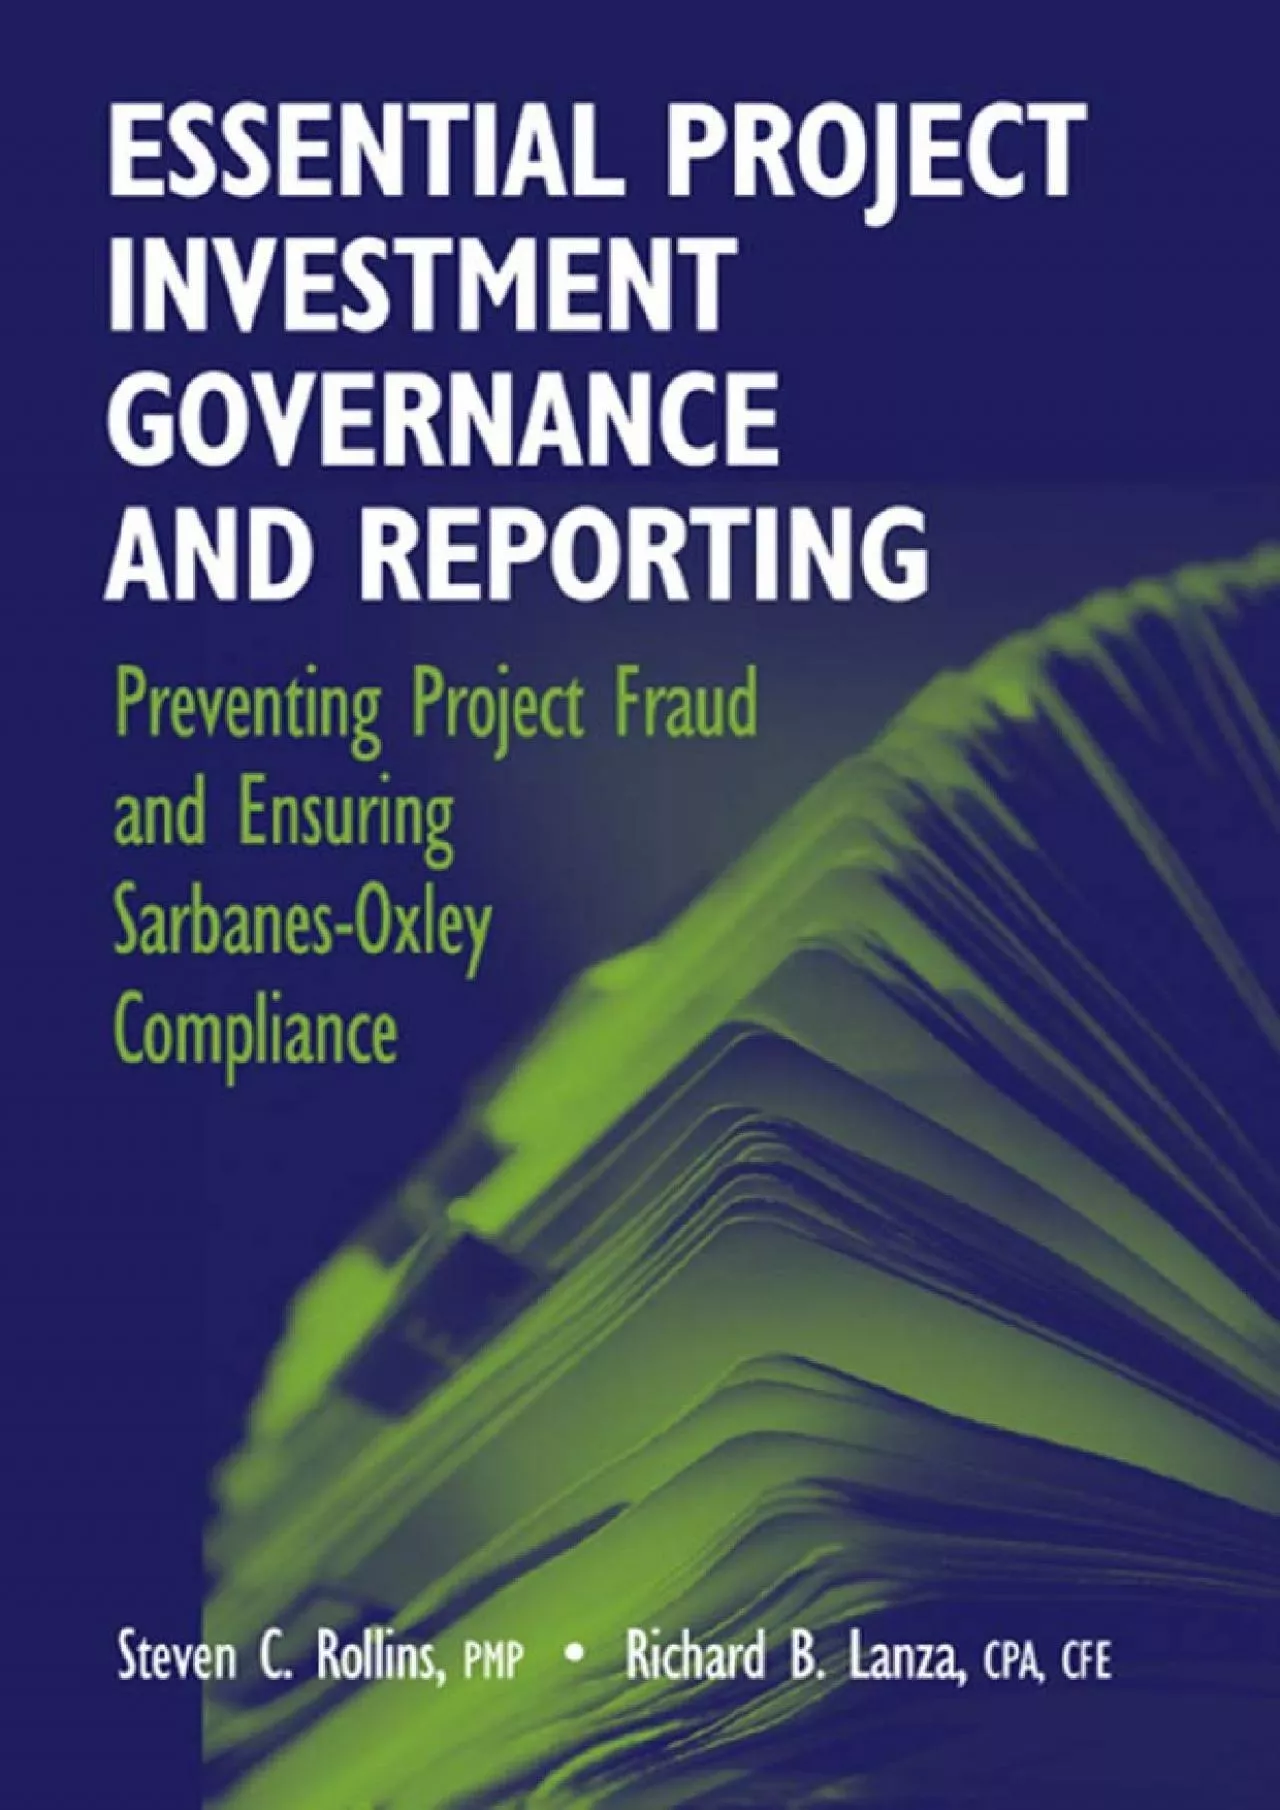 (DOWNLOAD)-Essential Project Investment Governance and Reporting: Preventing Project Fraud